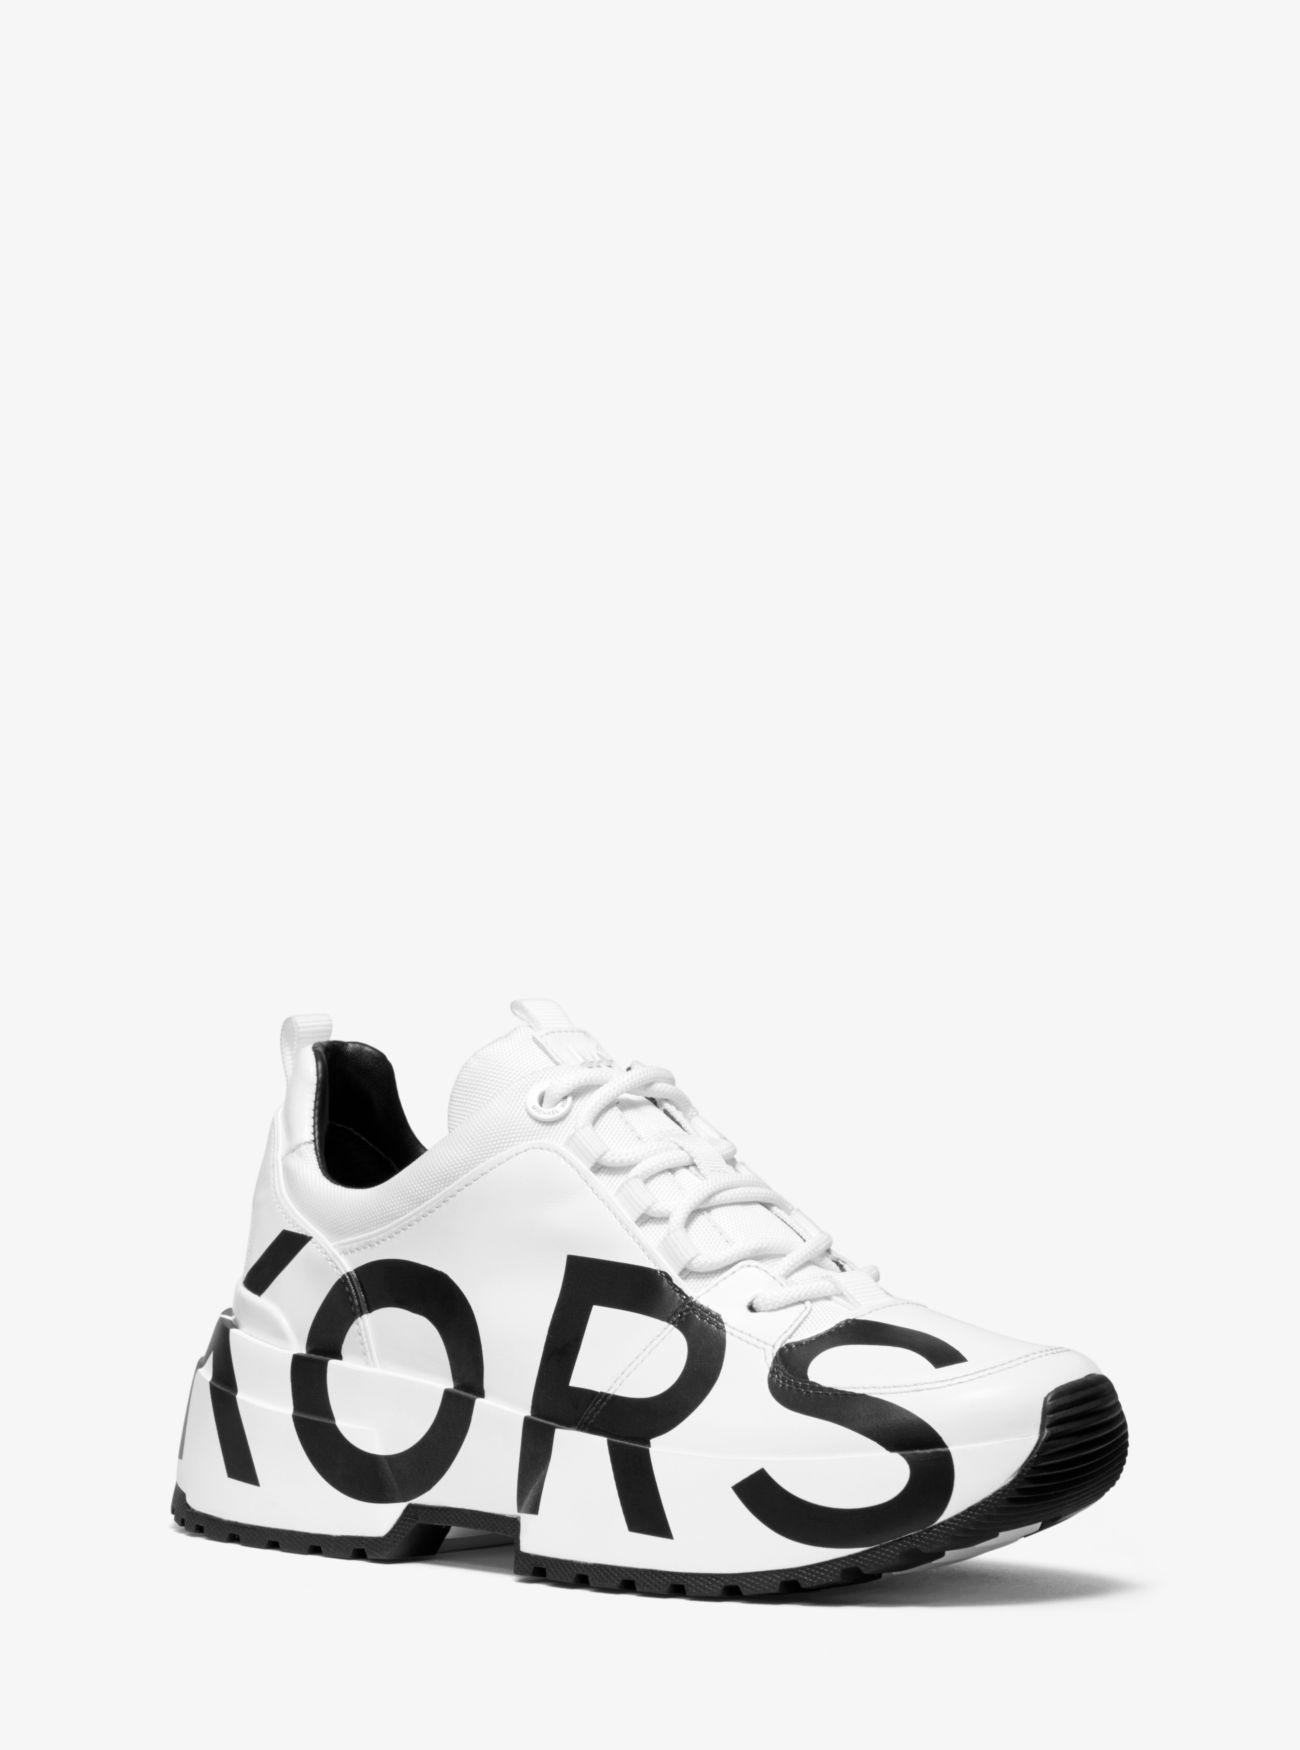 Michael Kors Cosmo Printed Leather Trainer in White | Lyst Canada